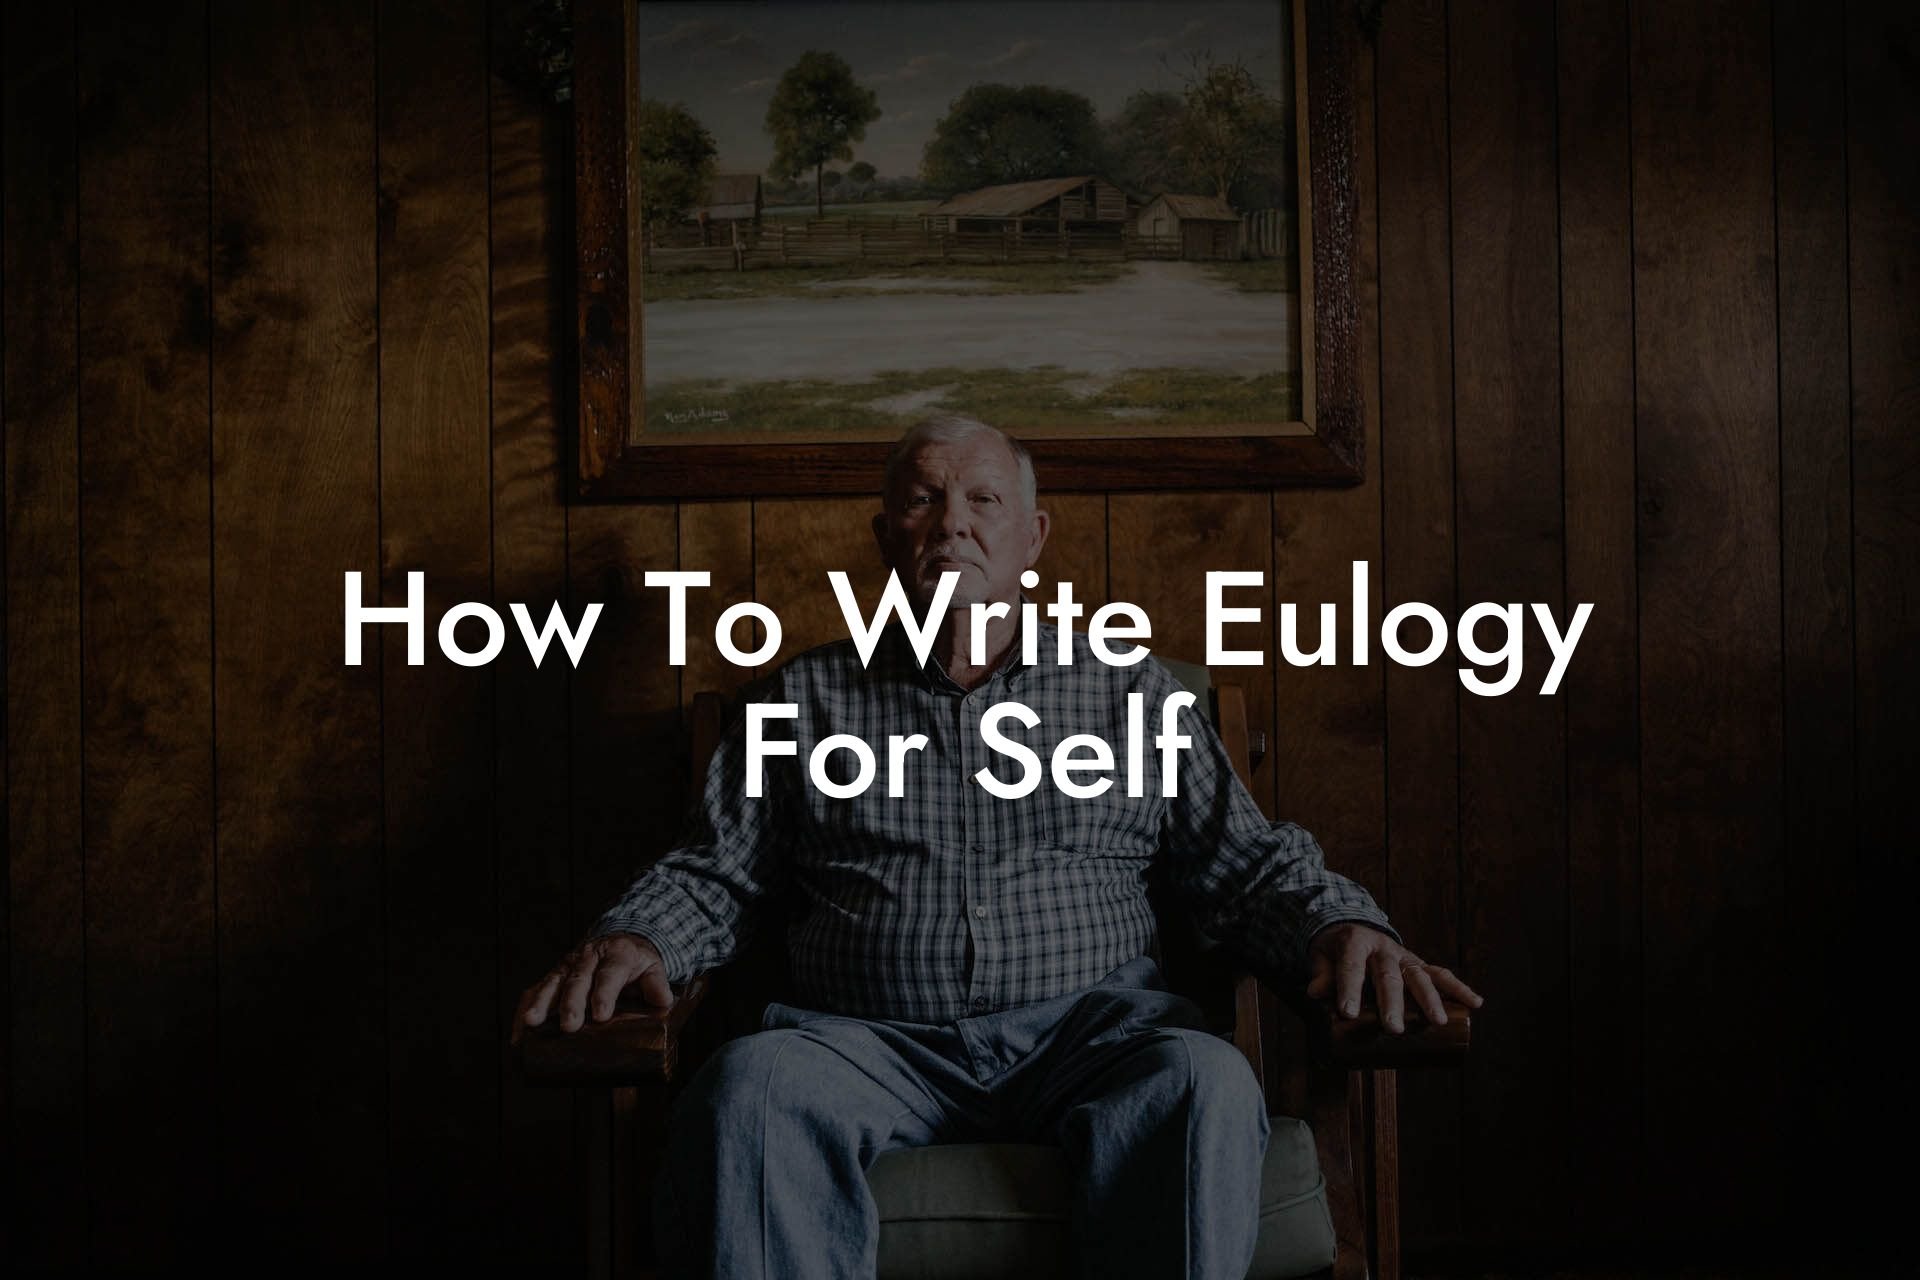 How To Write Eulogy For Self